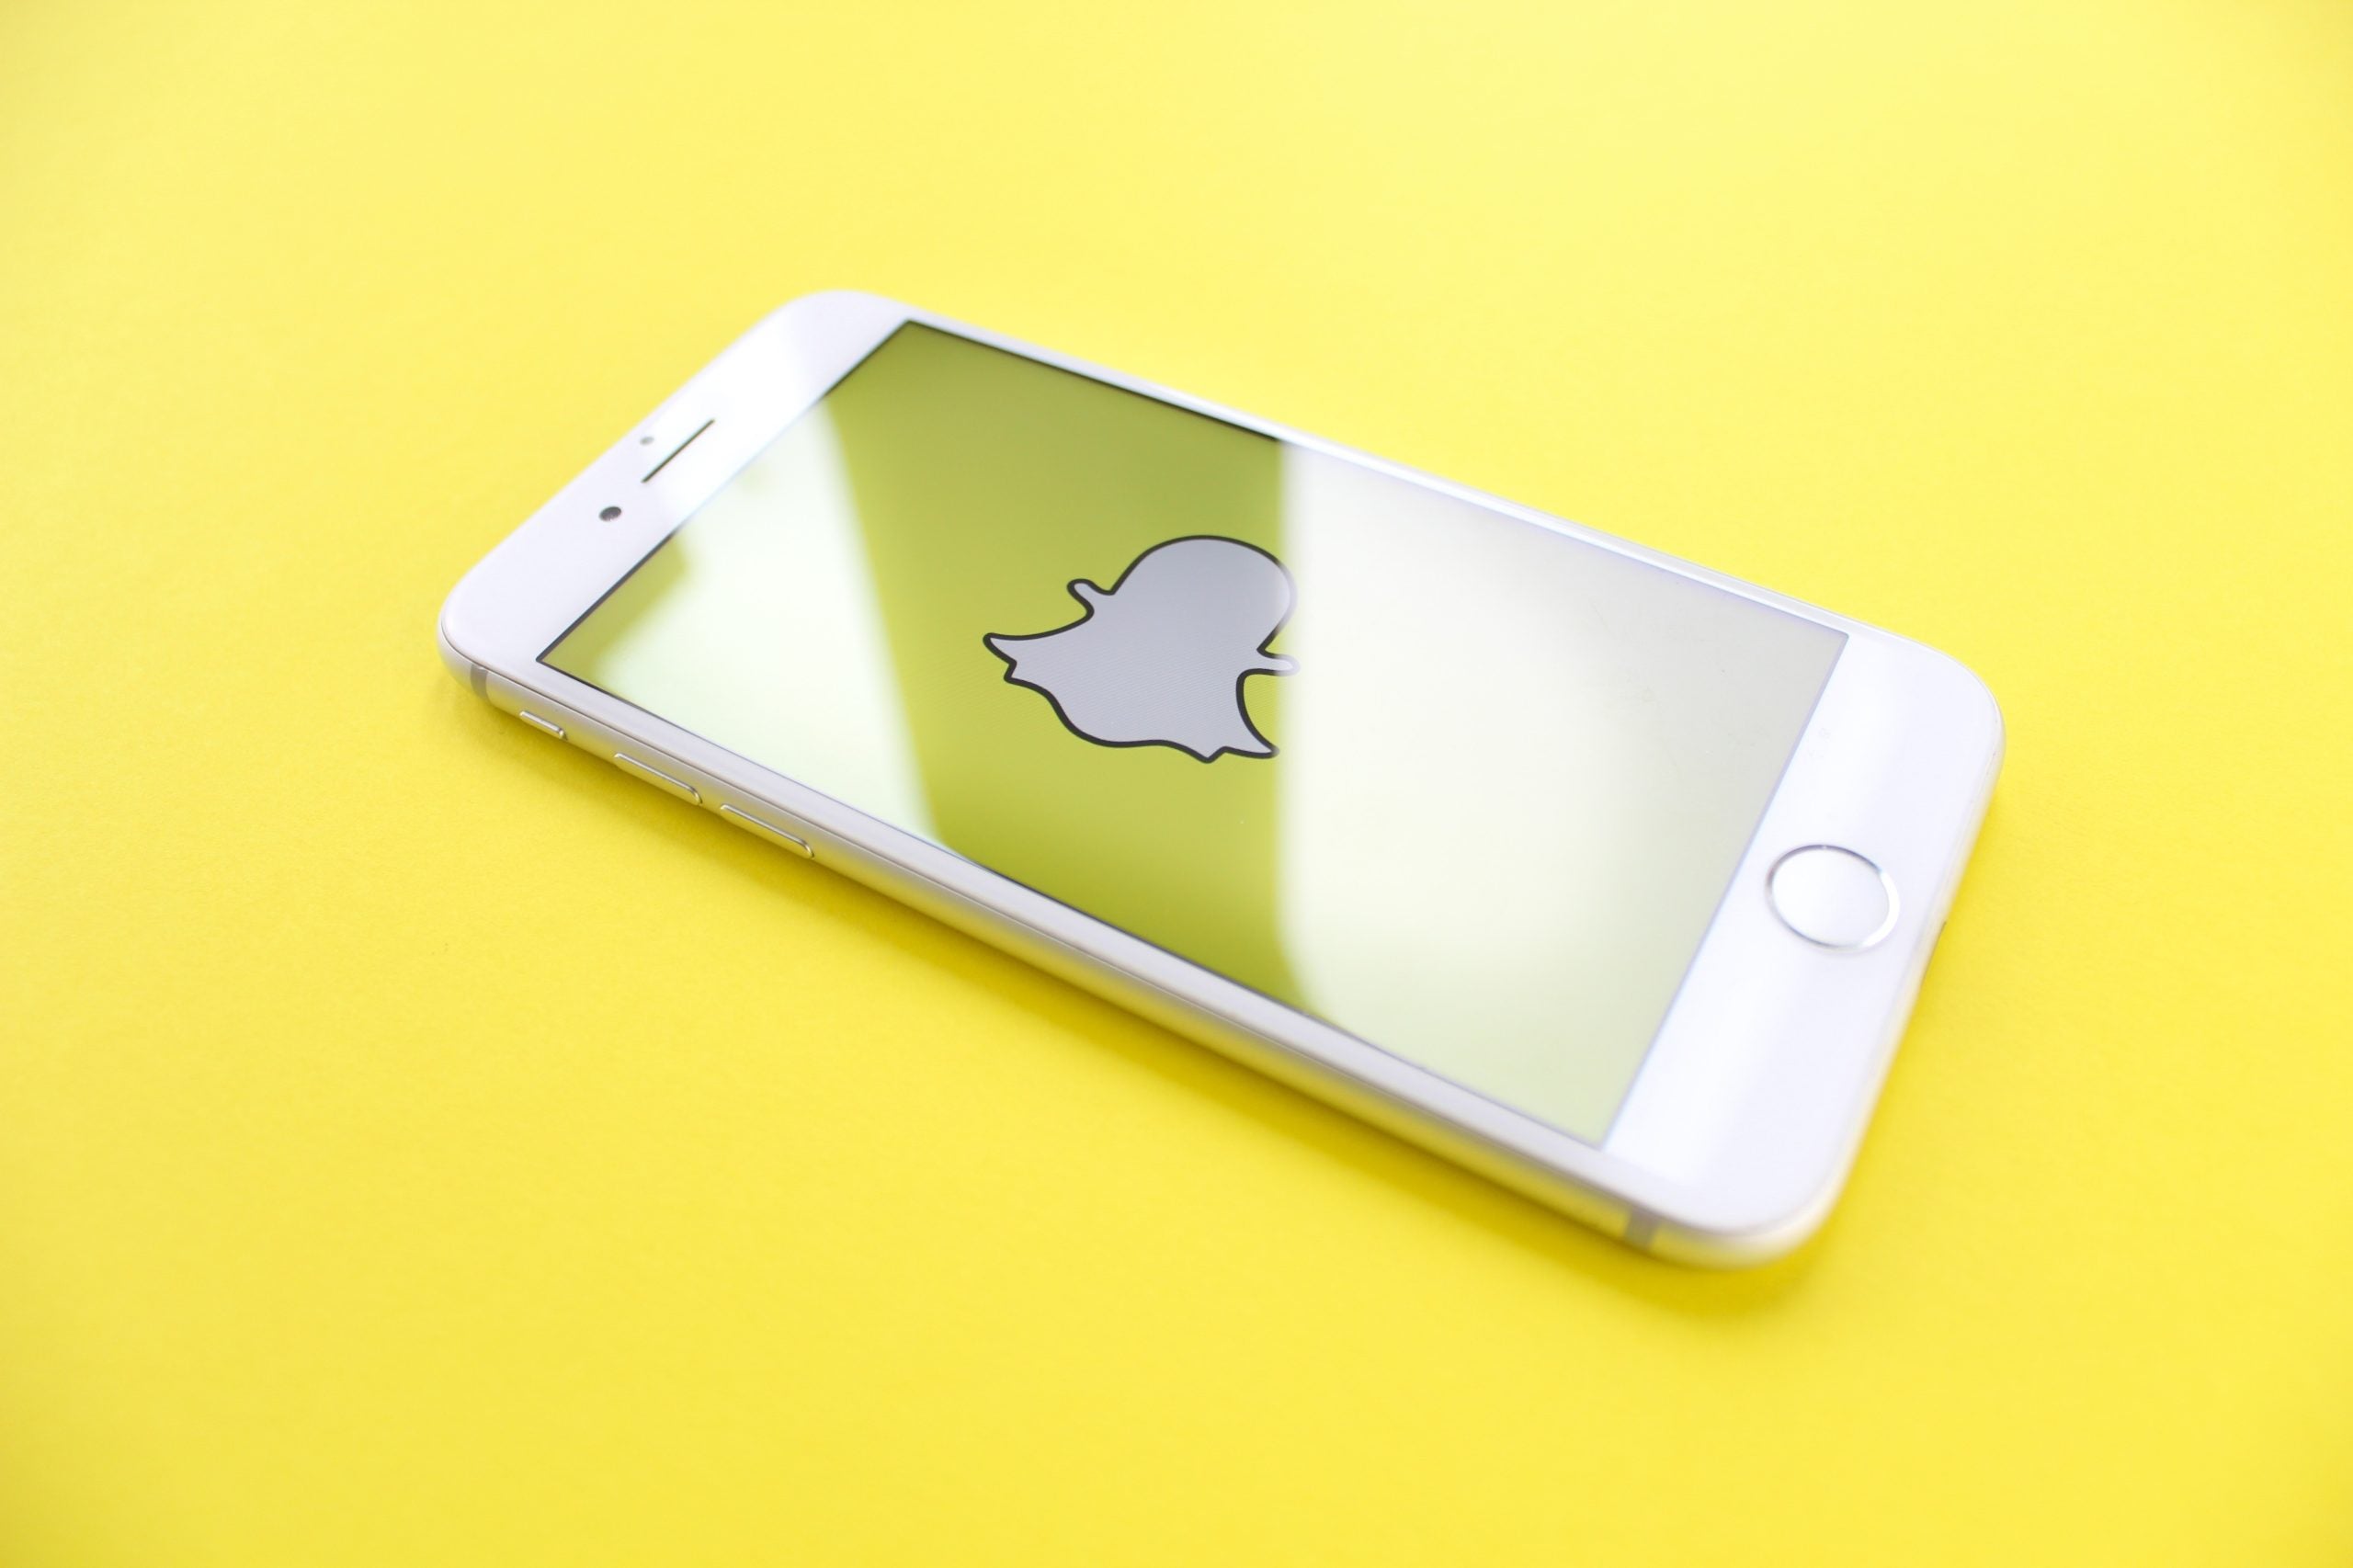 Snap Is Planning To Layoff 20% Of Employee Workforce